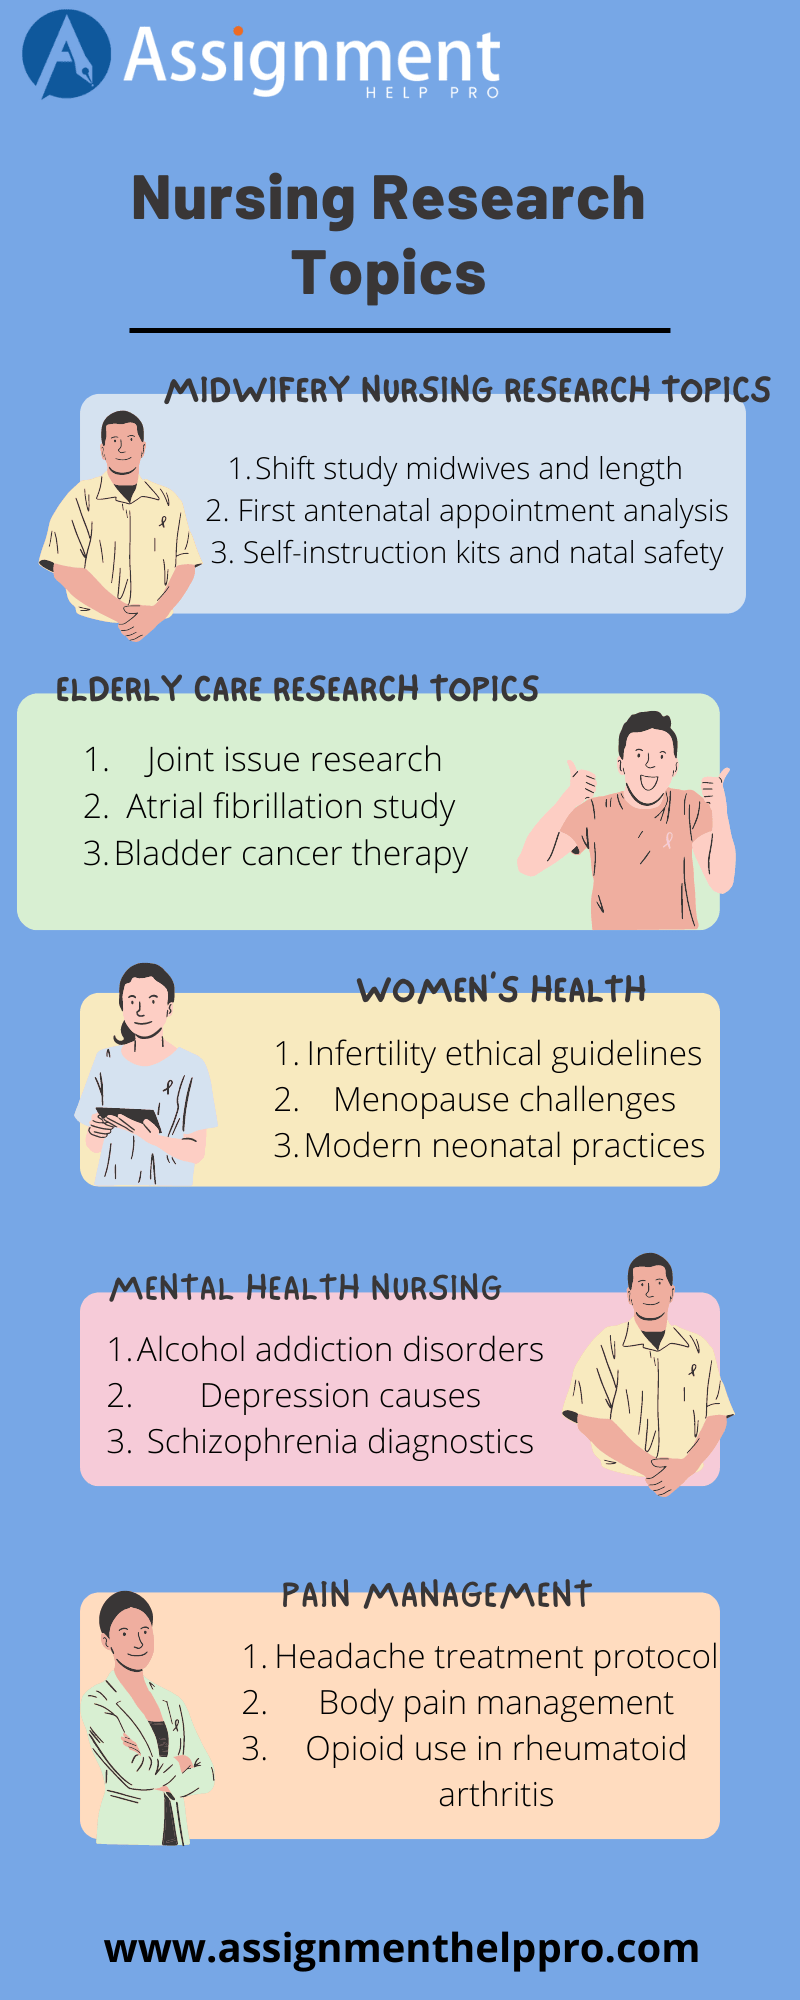 research paper topics in healthcare